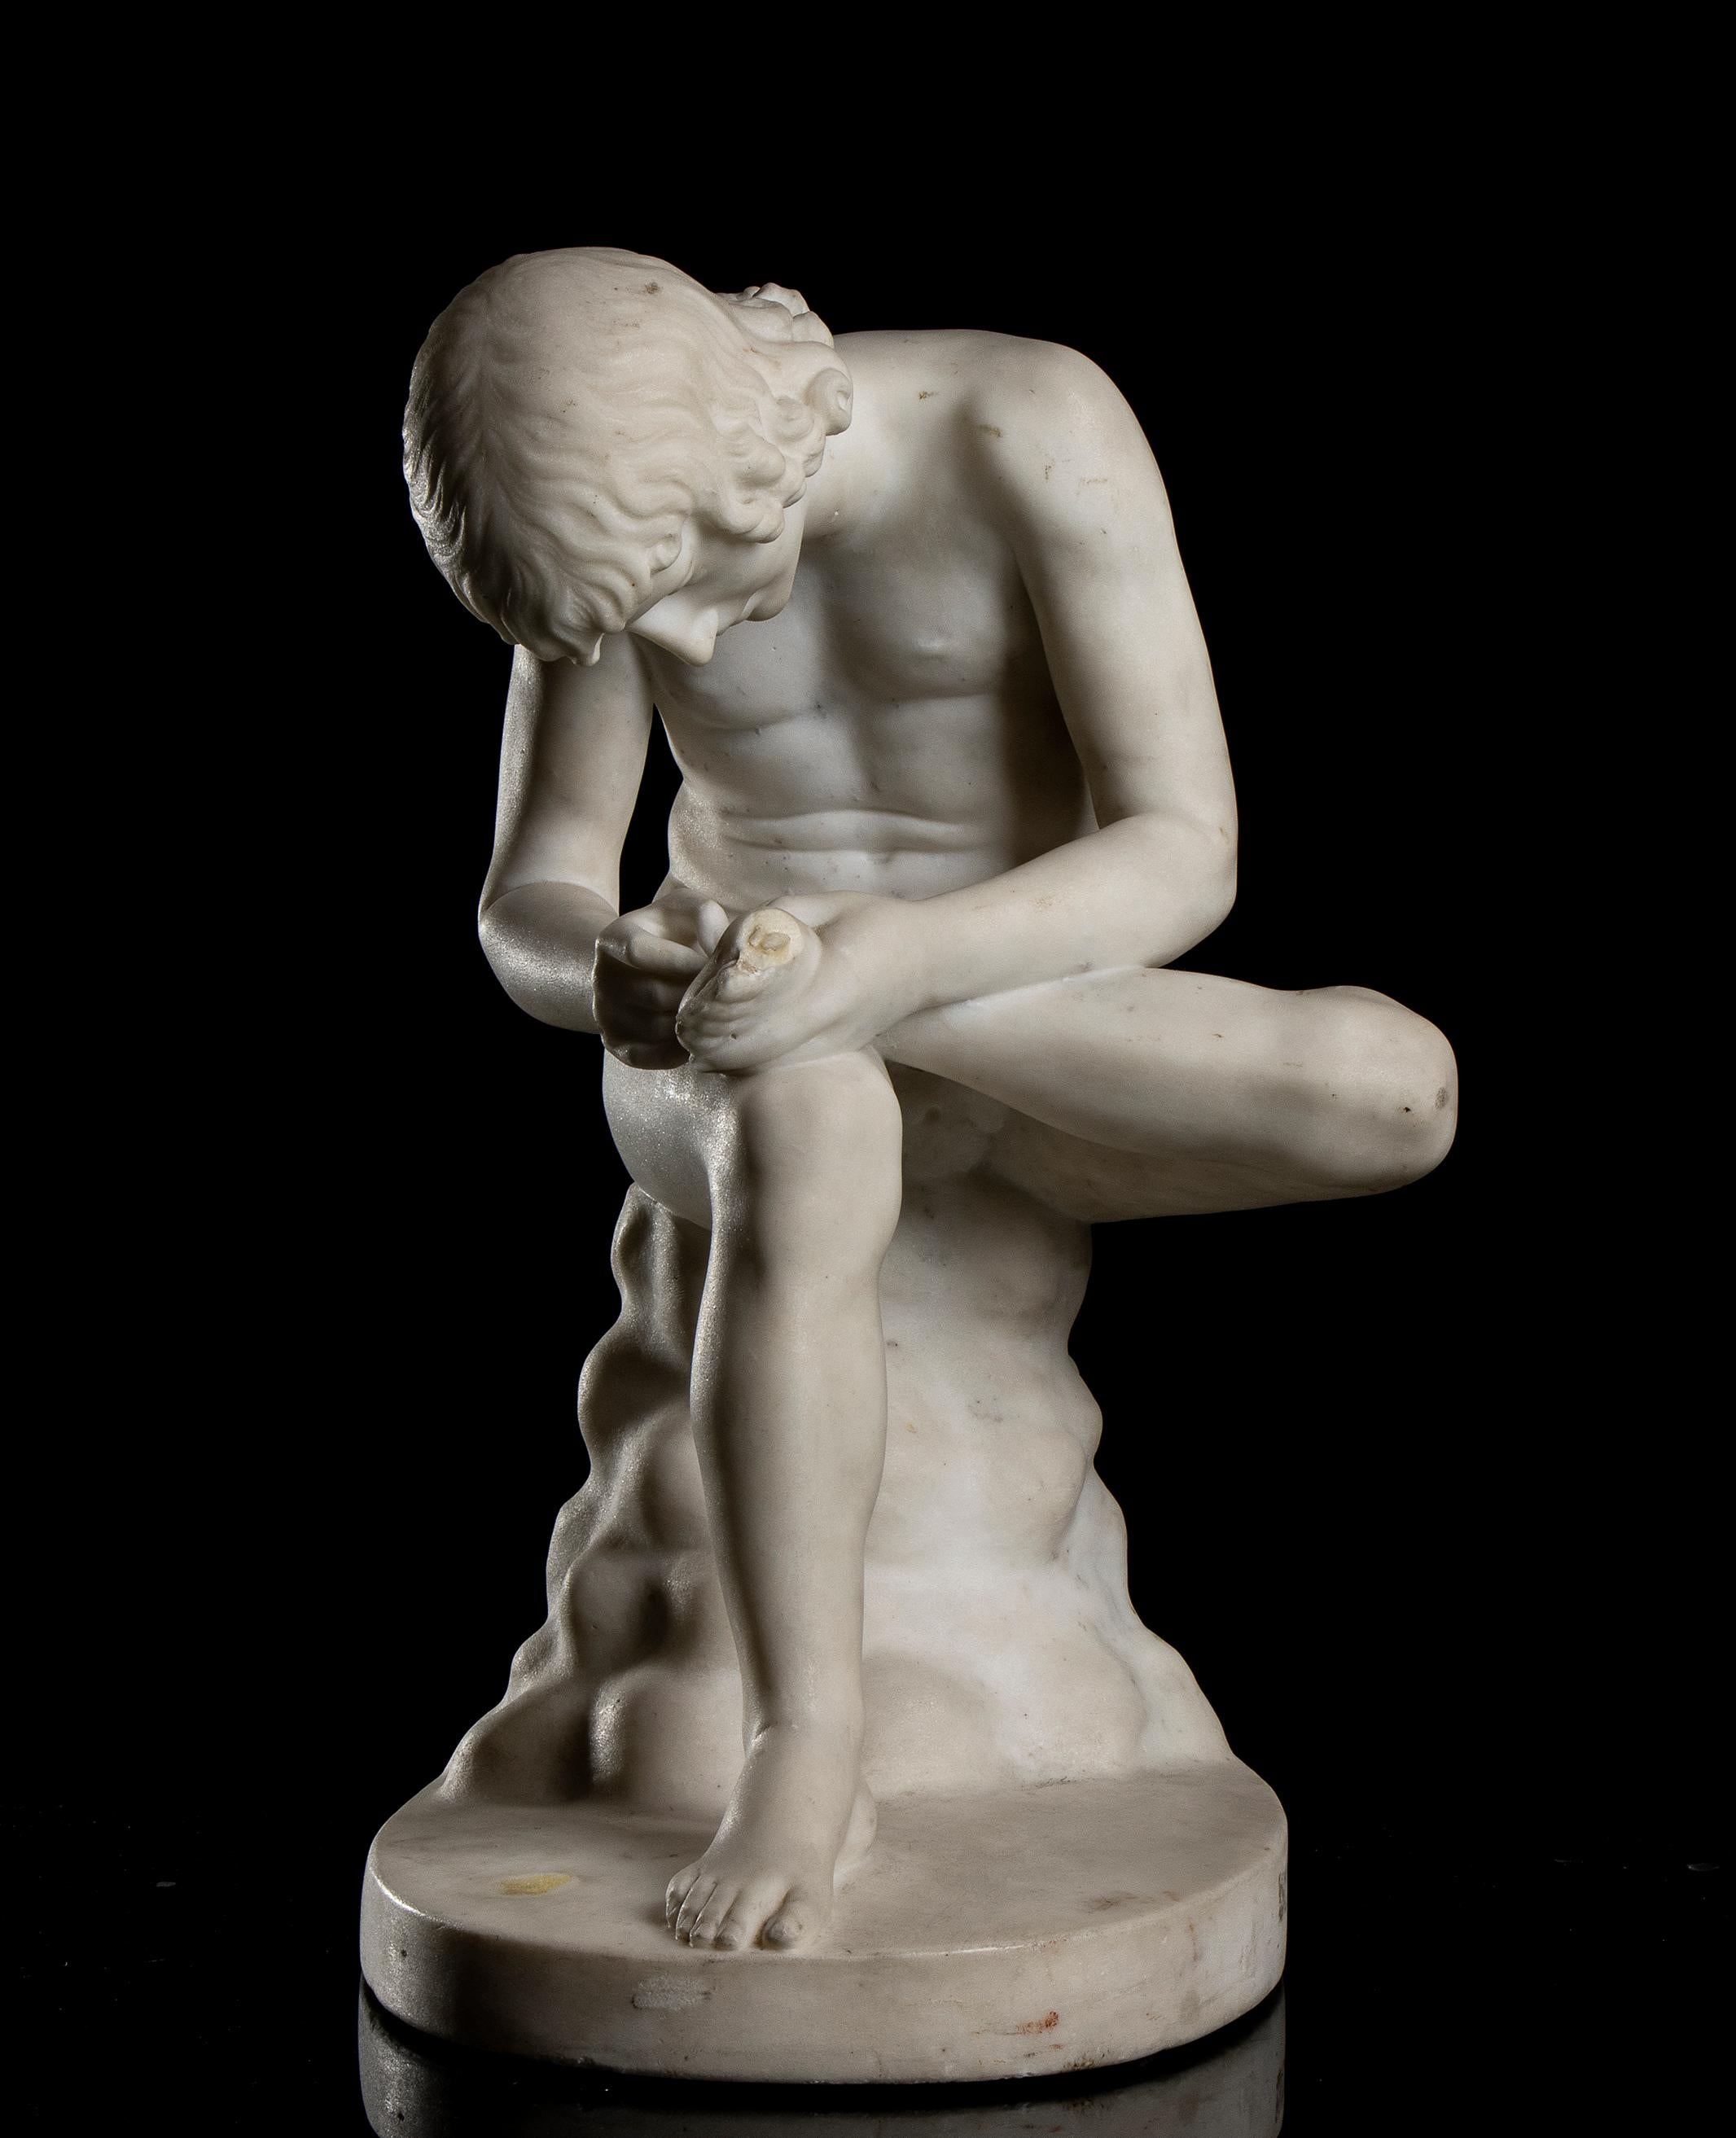 A sculpture of Boy with Thor grand tour style carved in Italy in the 19th century in white statuary marble, a scale size from the one preserved at the Uffizi Gallery in Florence.
The statue portrays a naked boy sitting on a rock, intent on removing